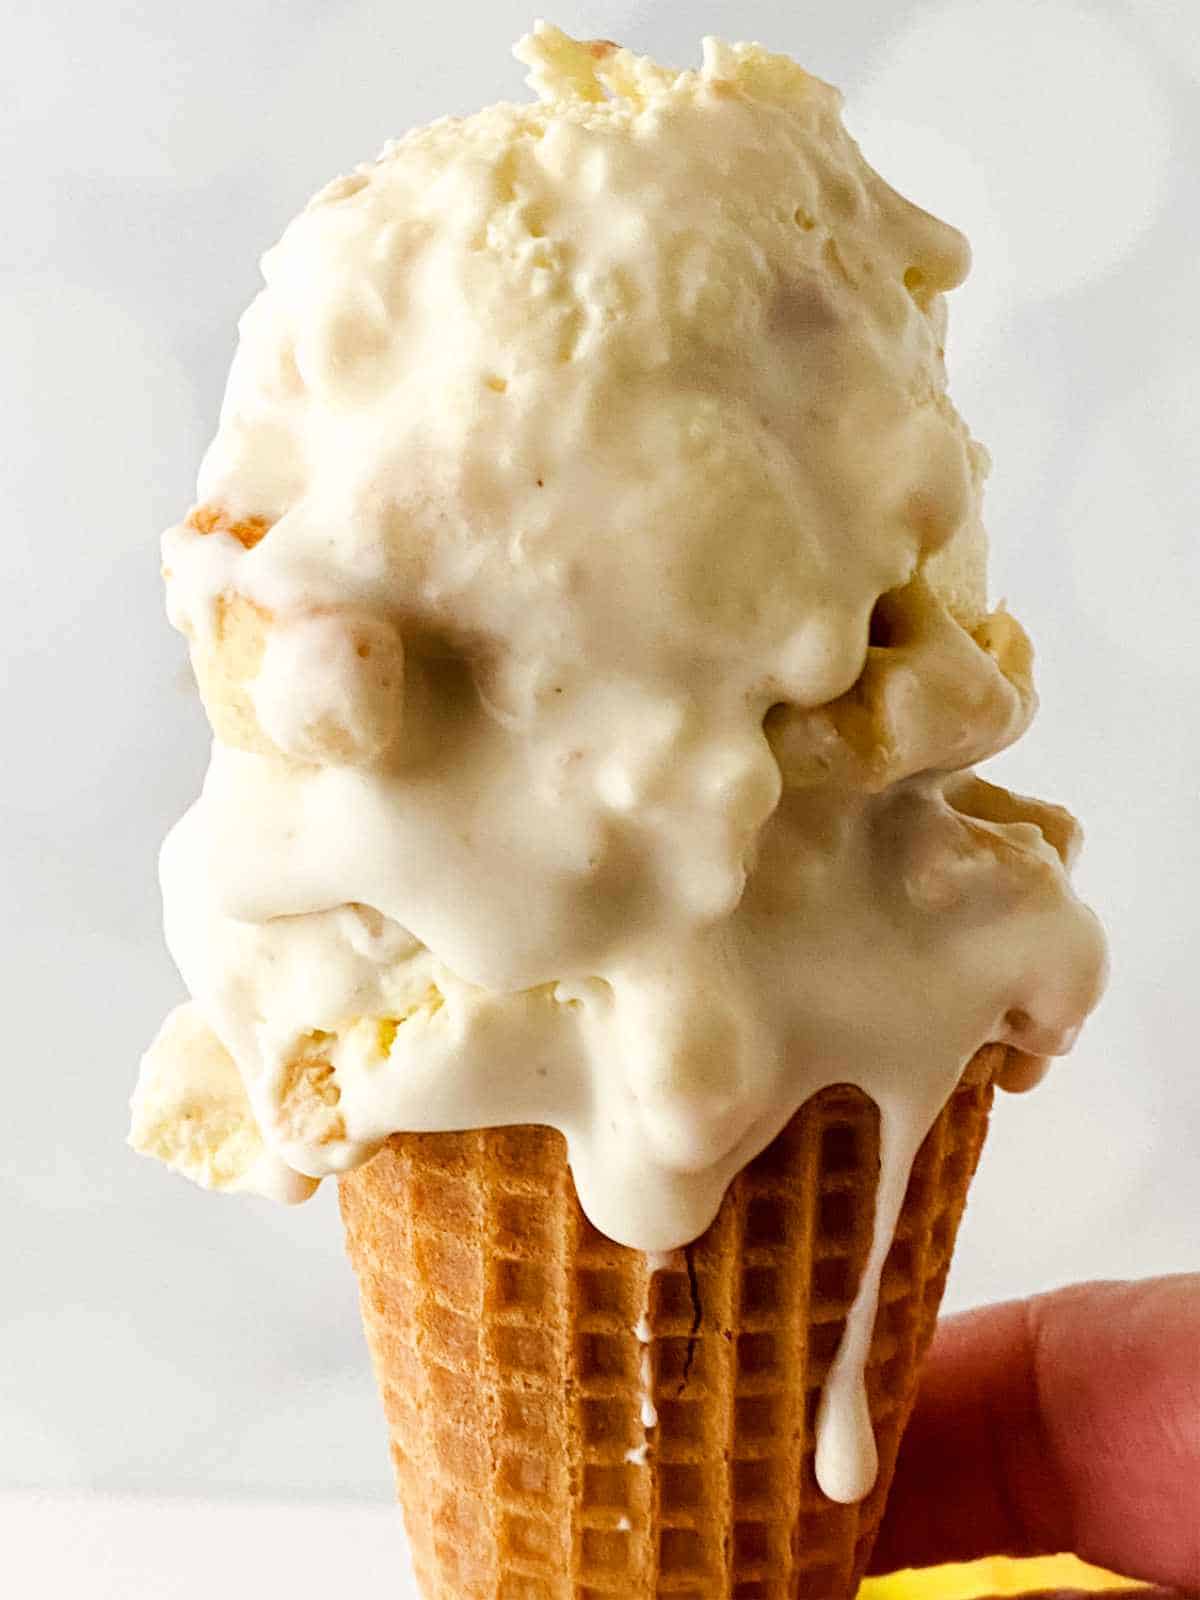 Ice cream cone with scoops of banana ice cream with some drips down the cone.